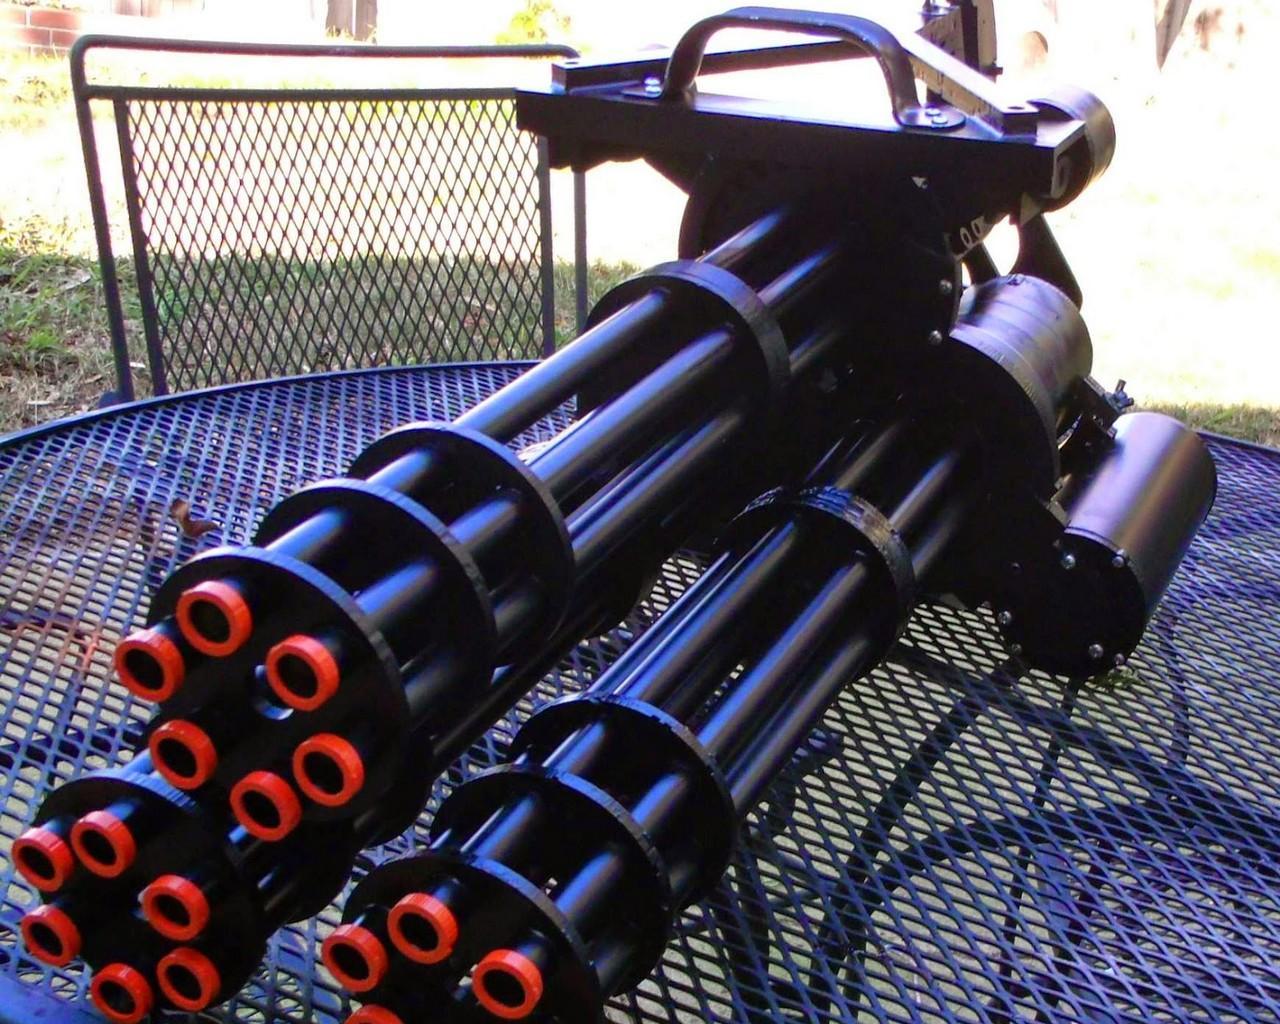 Wallpapers M 134 Minigun Super For Android Apk Download Images, Photos, Reviews